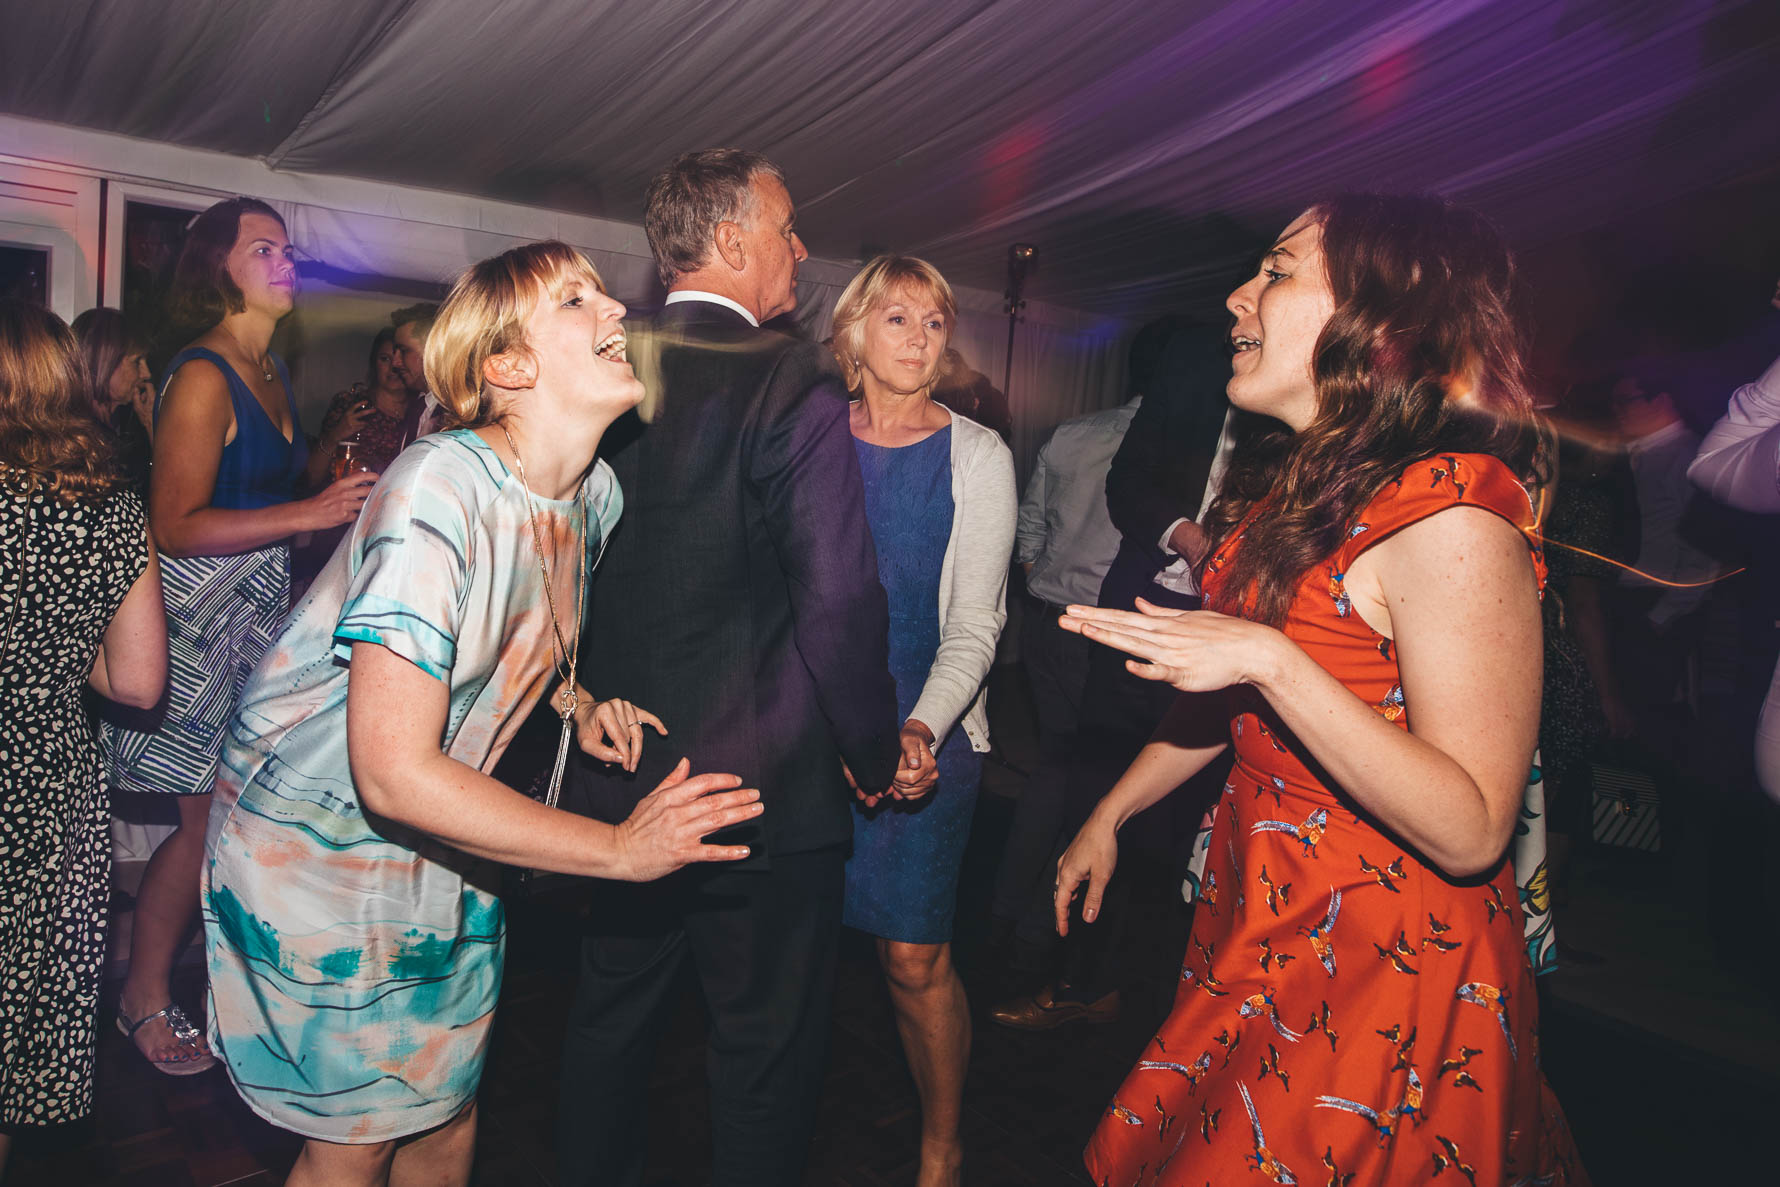 Two women facing each other on a dancefloor in a marquee singing along to a song as other members of the wedding party are dancing behind them